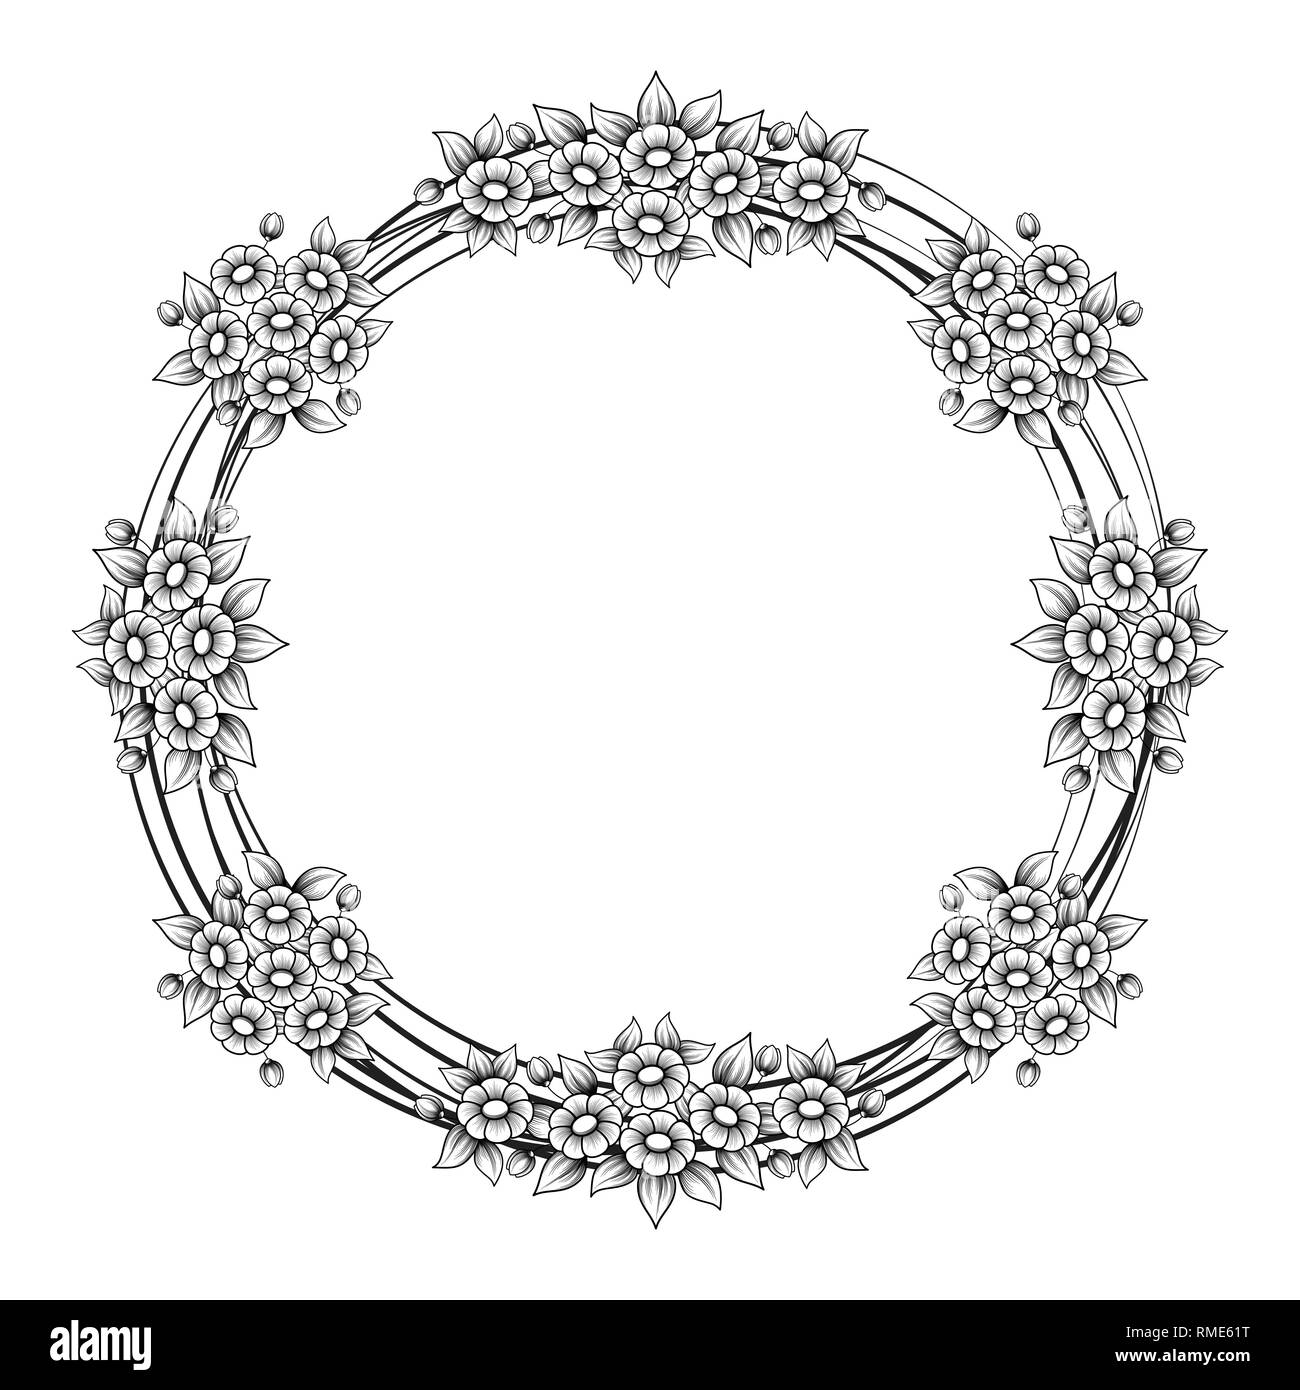 Circle black and white frame with daisy flower patterns isolated on white background Stock Vector